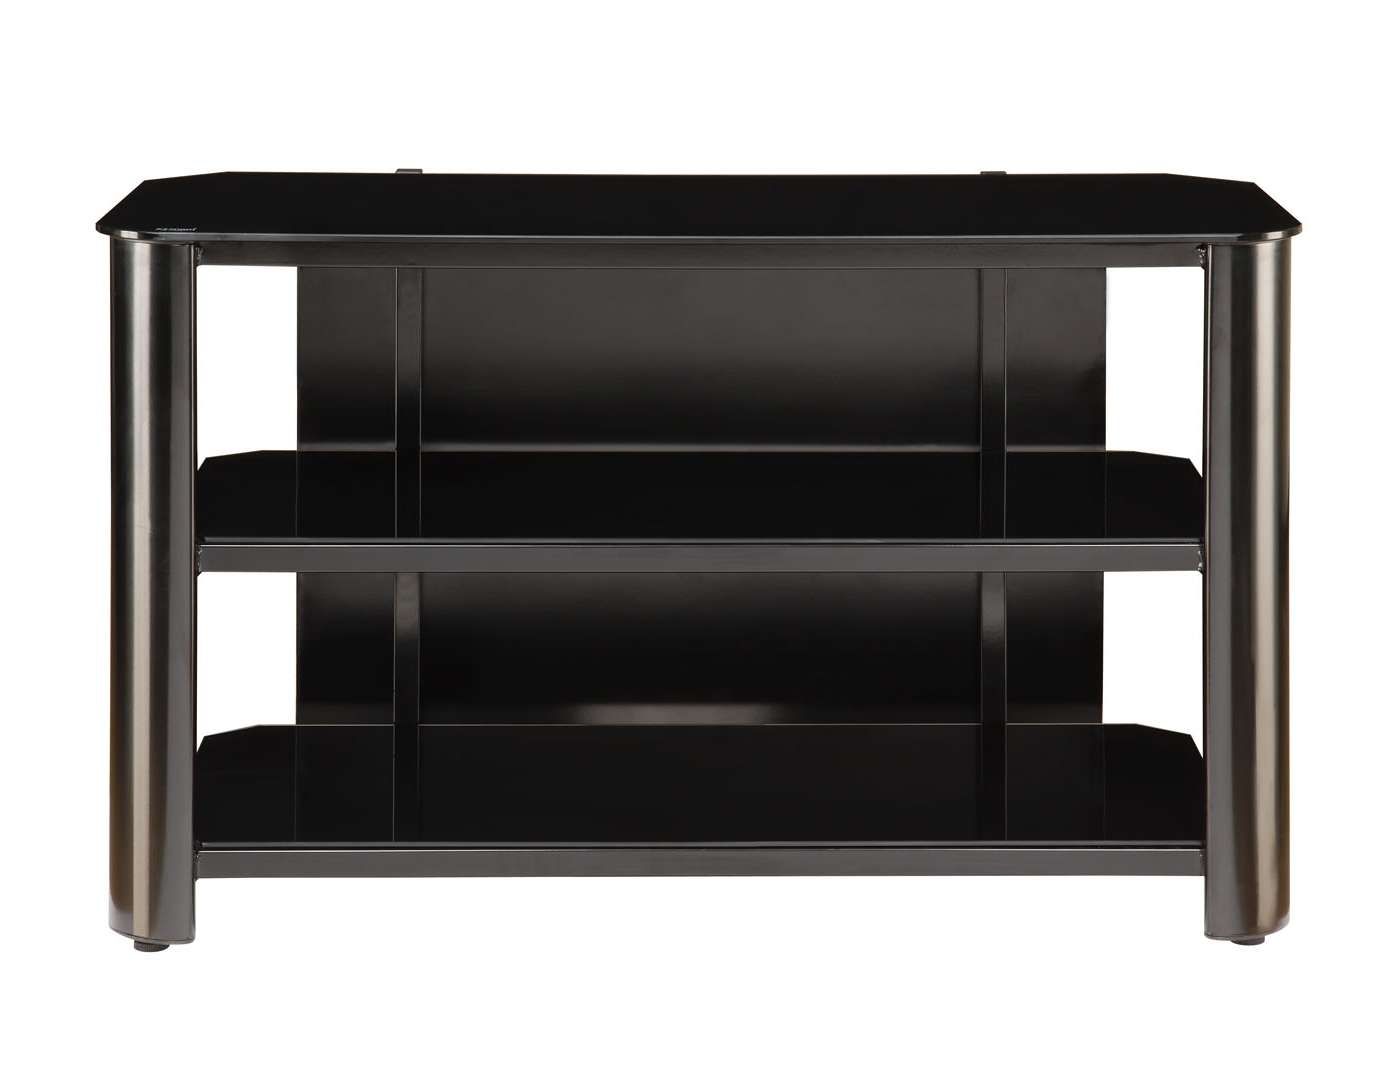 Innovex Black Glass Tv Stand Tpt42g29 Within Glass Tv Stands (View 14 of 15)